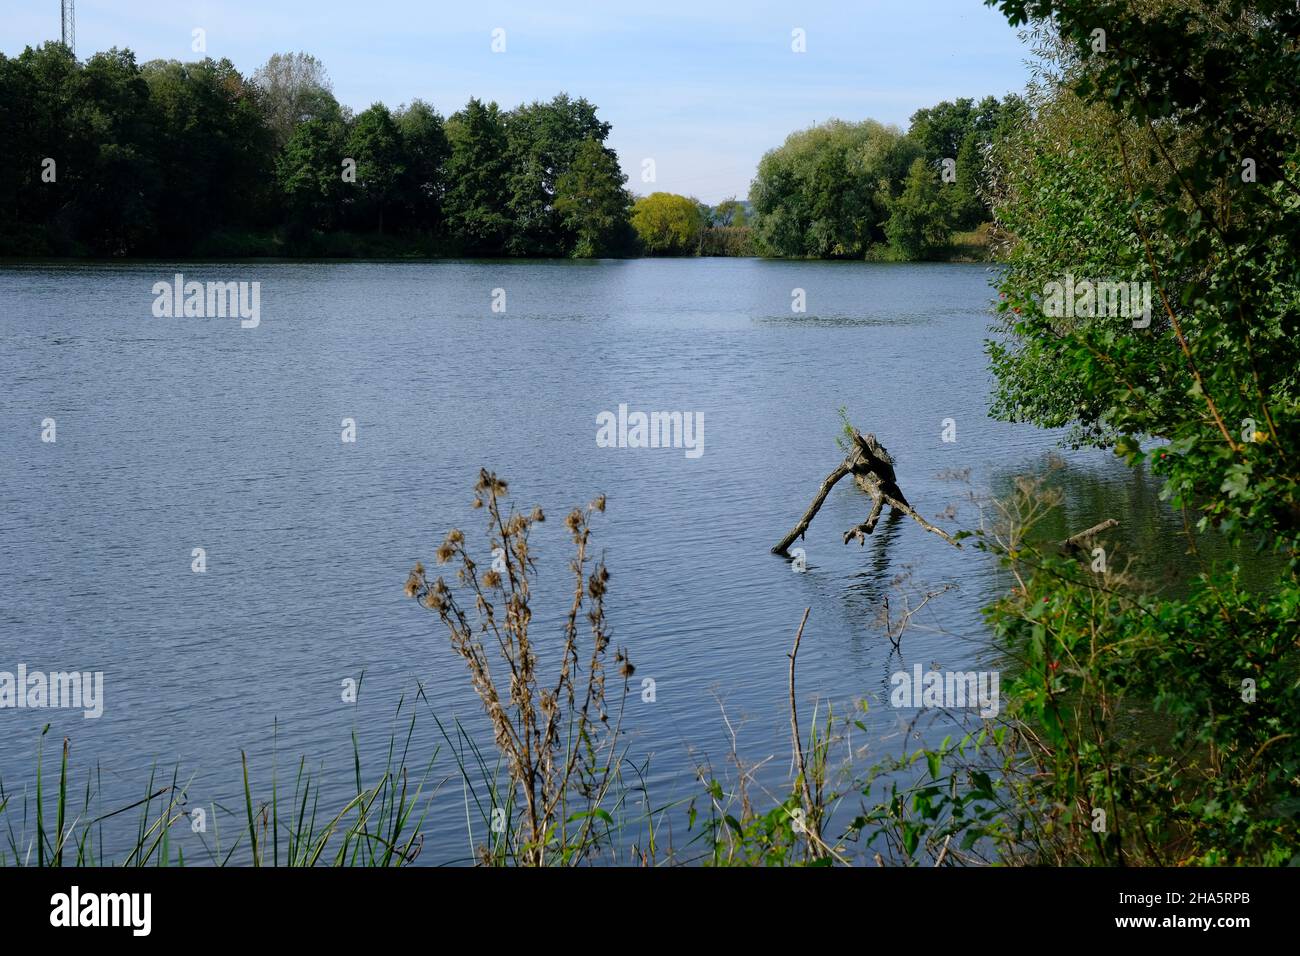 quarry ponds near dörfleins,part of the life nature project upper main valley,town of hallstadt,bamberg district,upper franconia,franconia,bavaria,germany Stock Photo